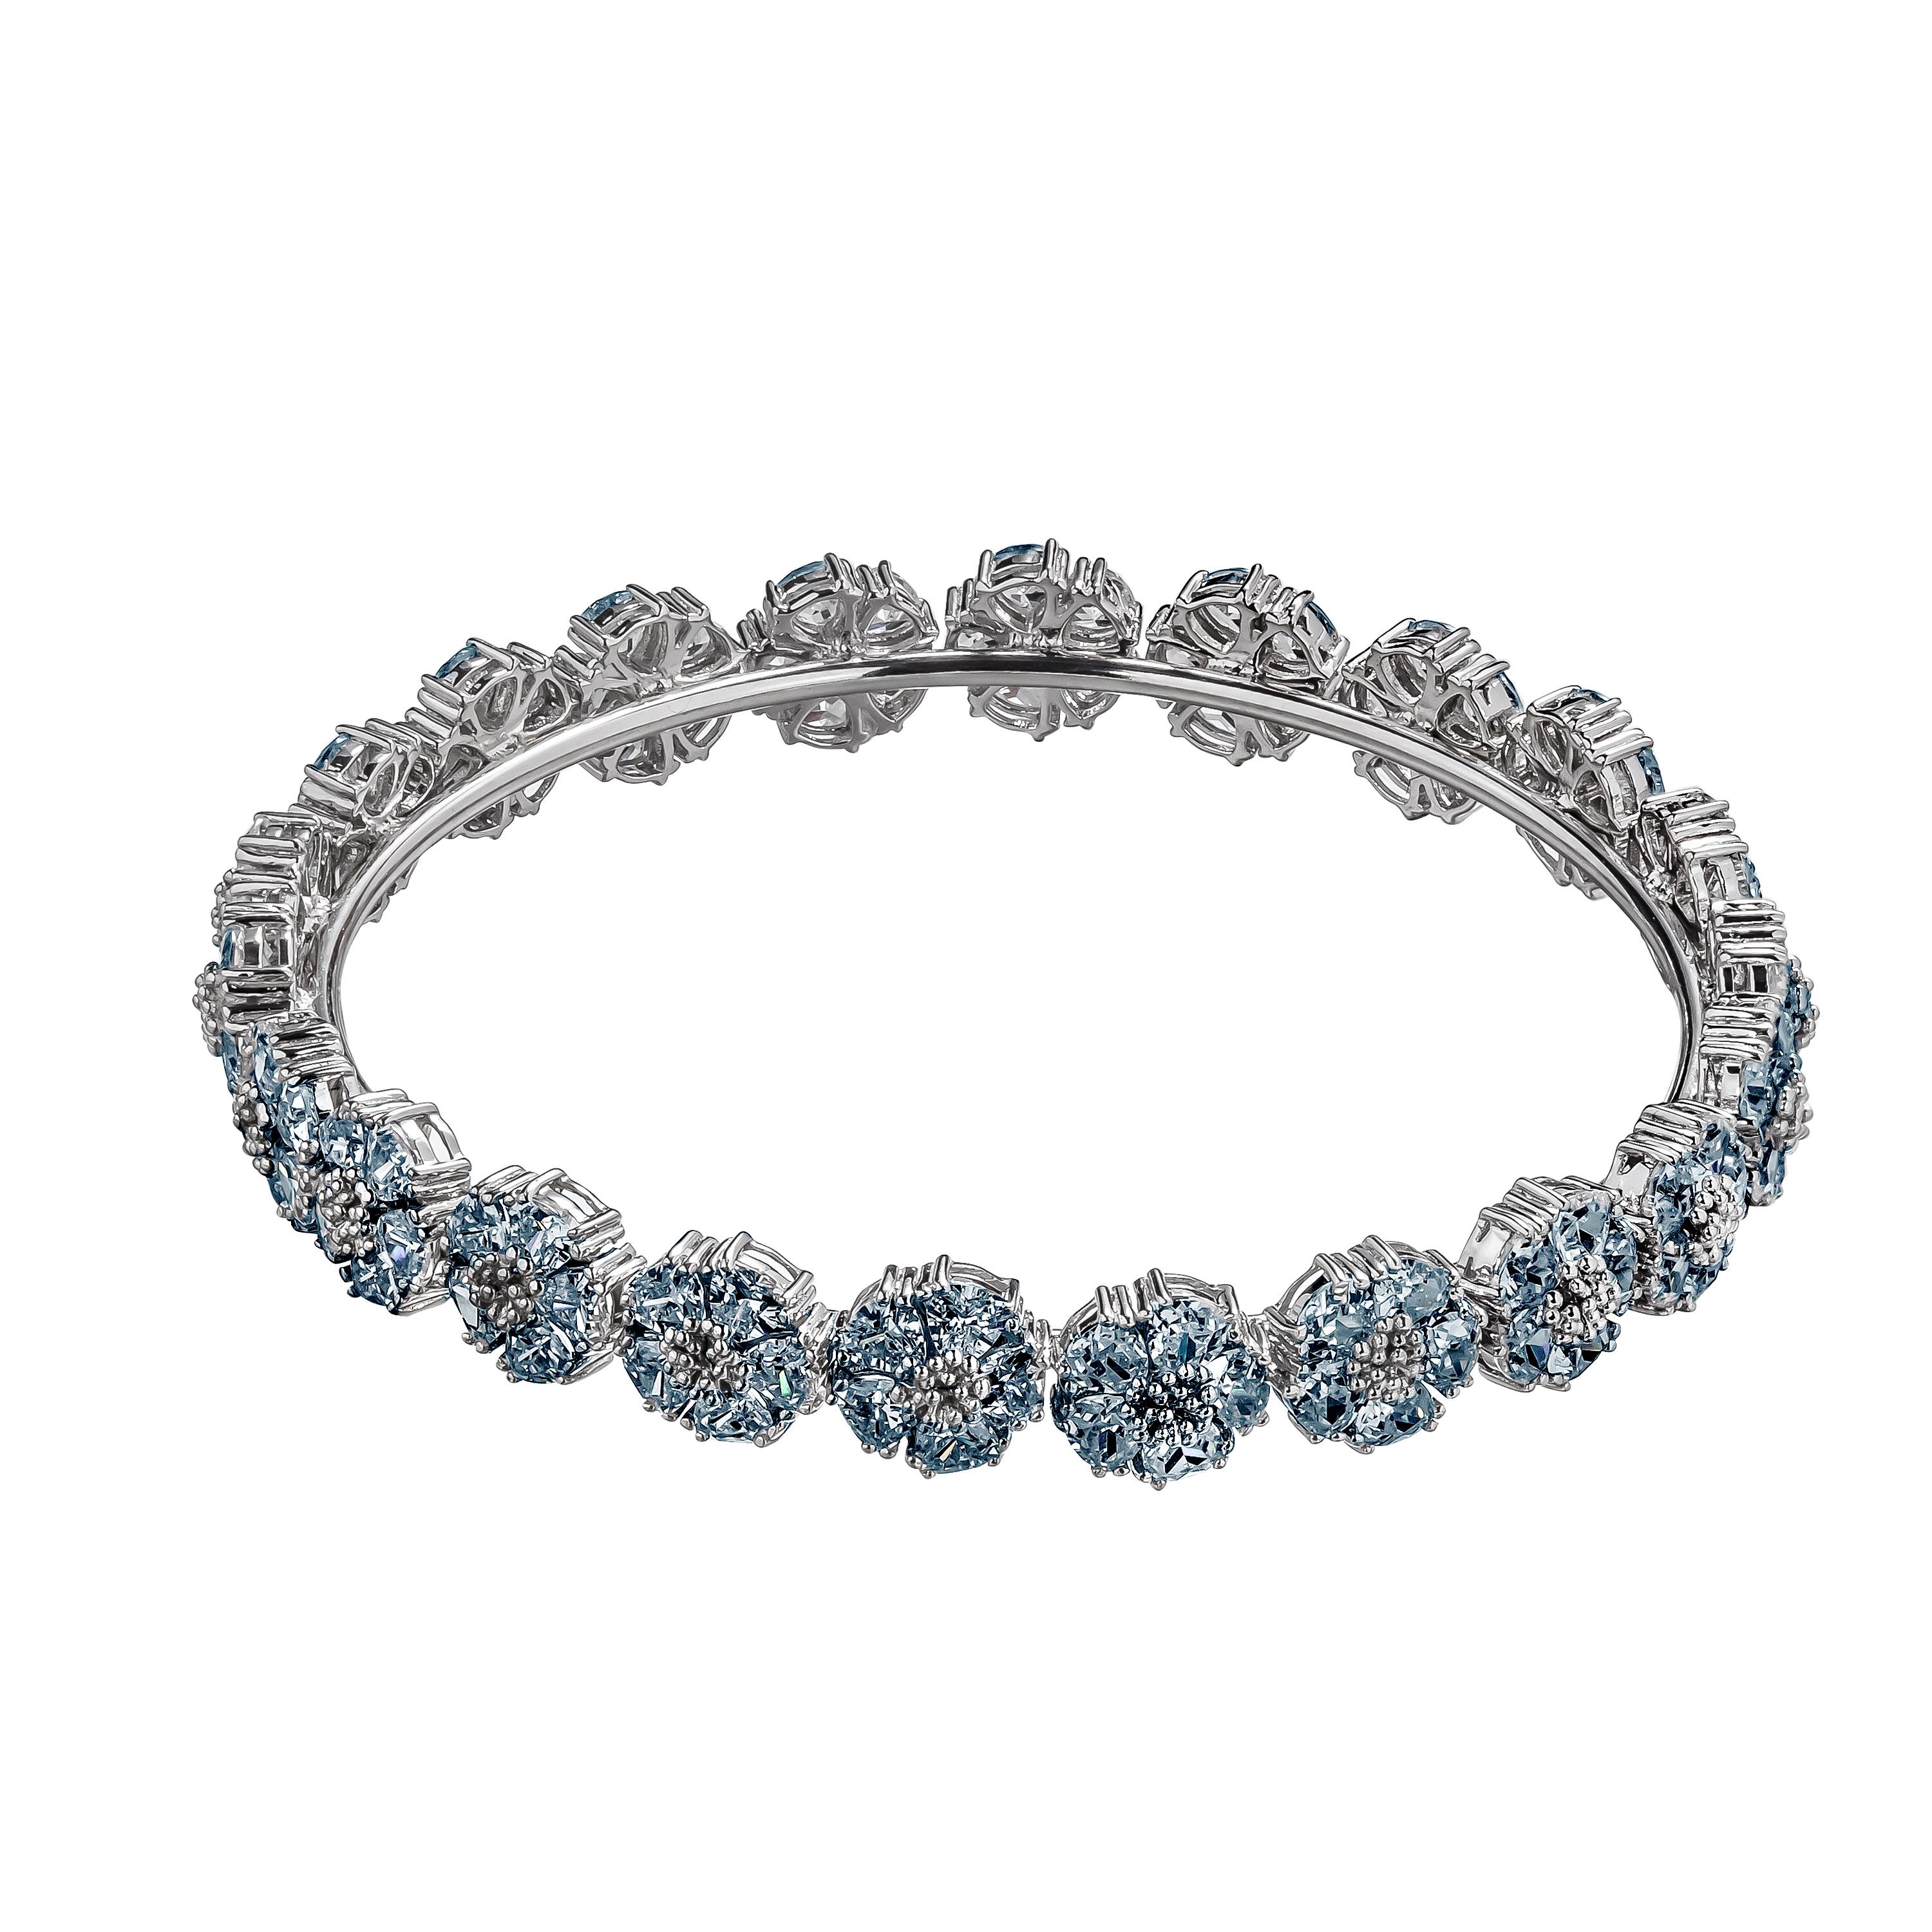 Designed in NYC

.925 Sterling Silver 10 x 10 mm Dark Blue Topaz Blossom Gemstone Wraparound Bracelet.  No matter the season, allow natural beauty to surround you wherever you go. Blossom gemstone wraparound bracelet: 

Sterling silver